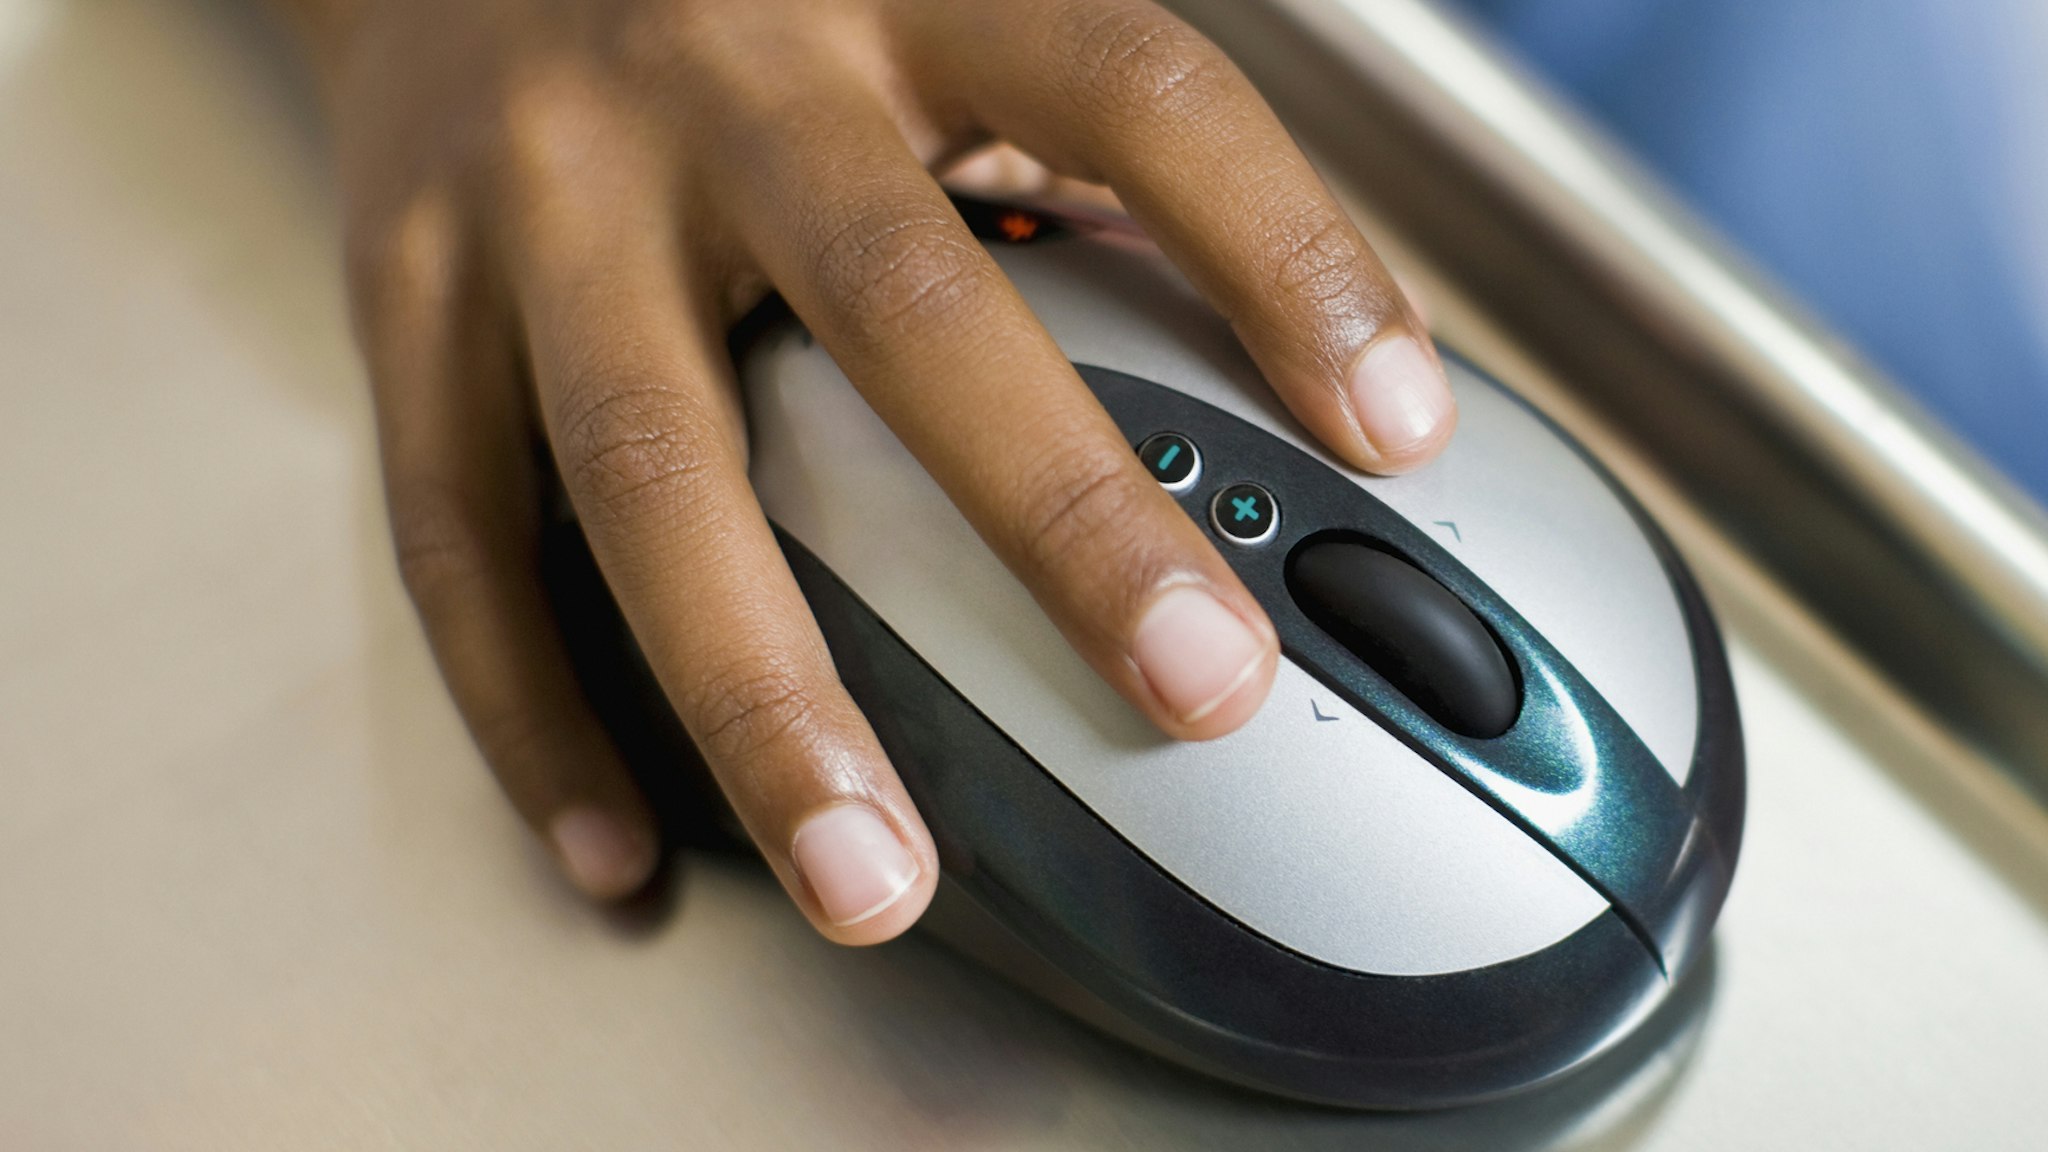 African girl's hand on computer mouse - stock photo